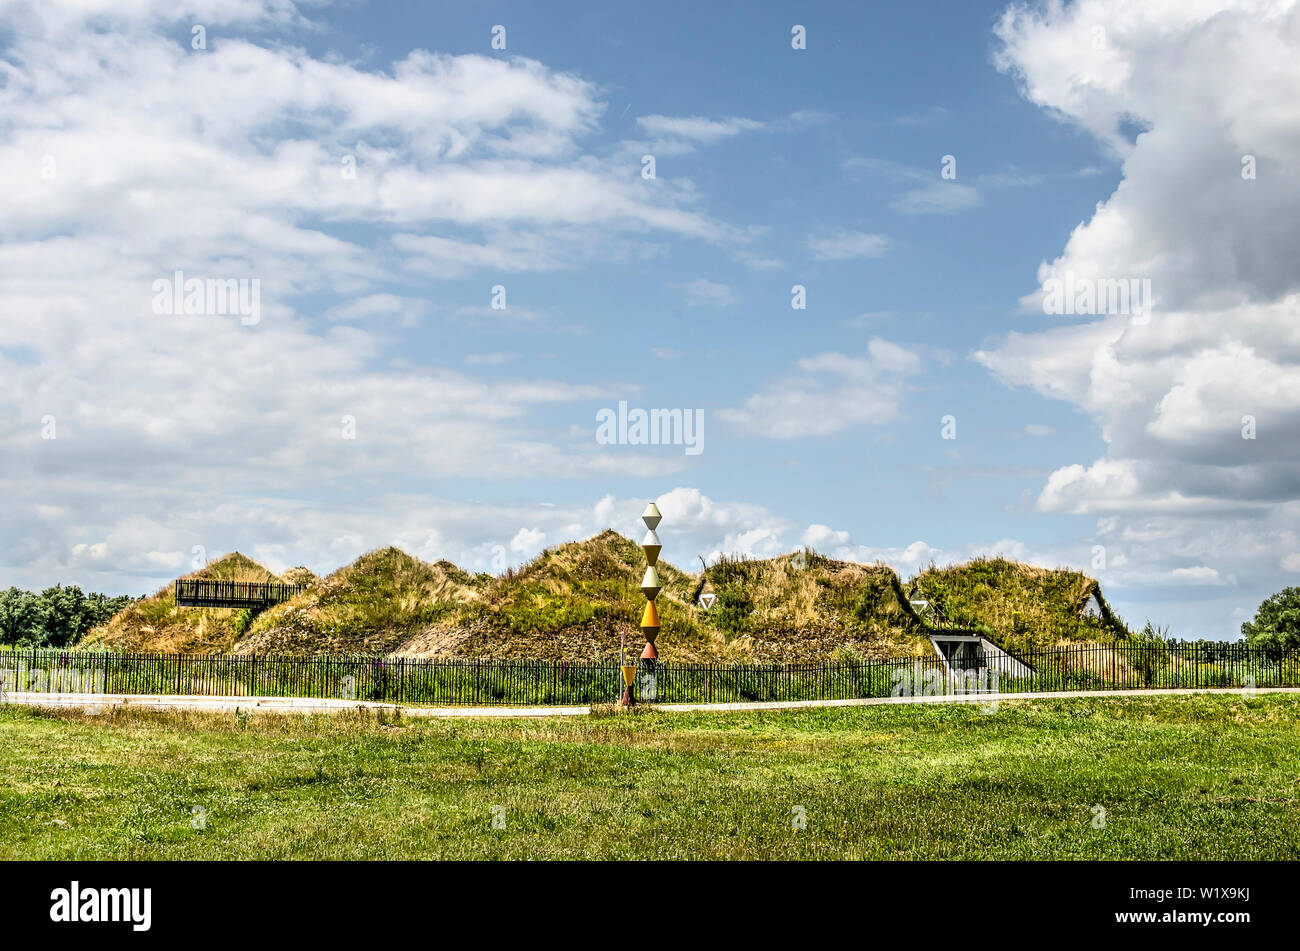 Werkendam, The Netherlands, July 3, 2019: front facade of the refurbished Biesbosch museum, covered with soil, grass and wildflowers, under a blue sky Stock Photo